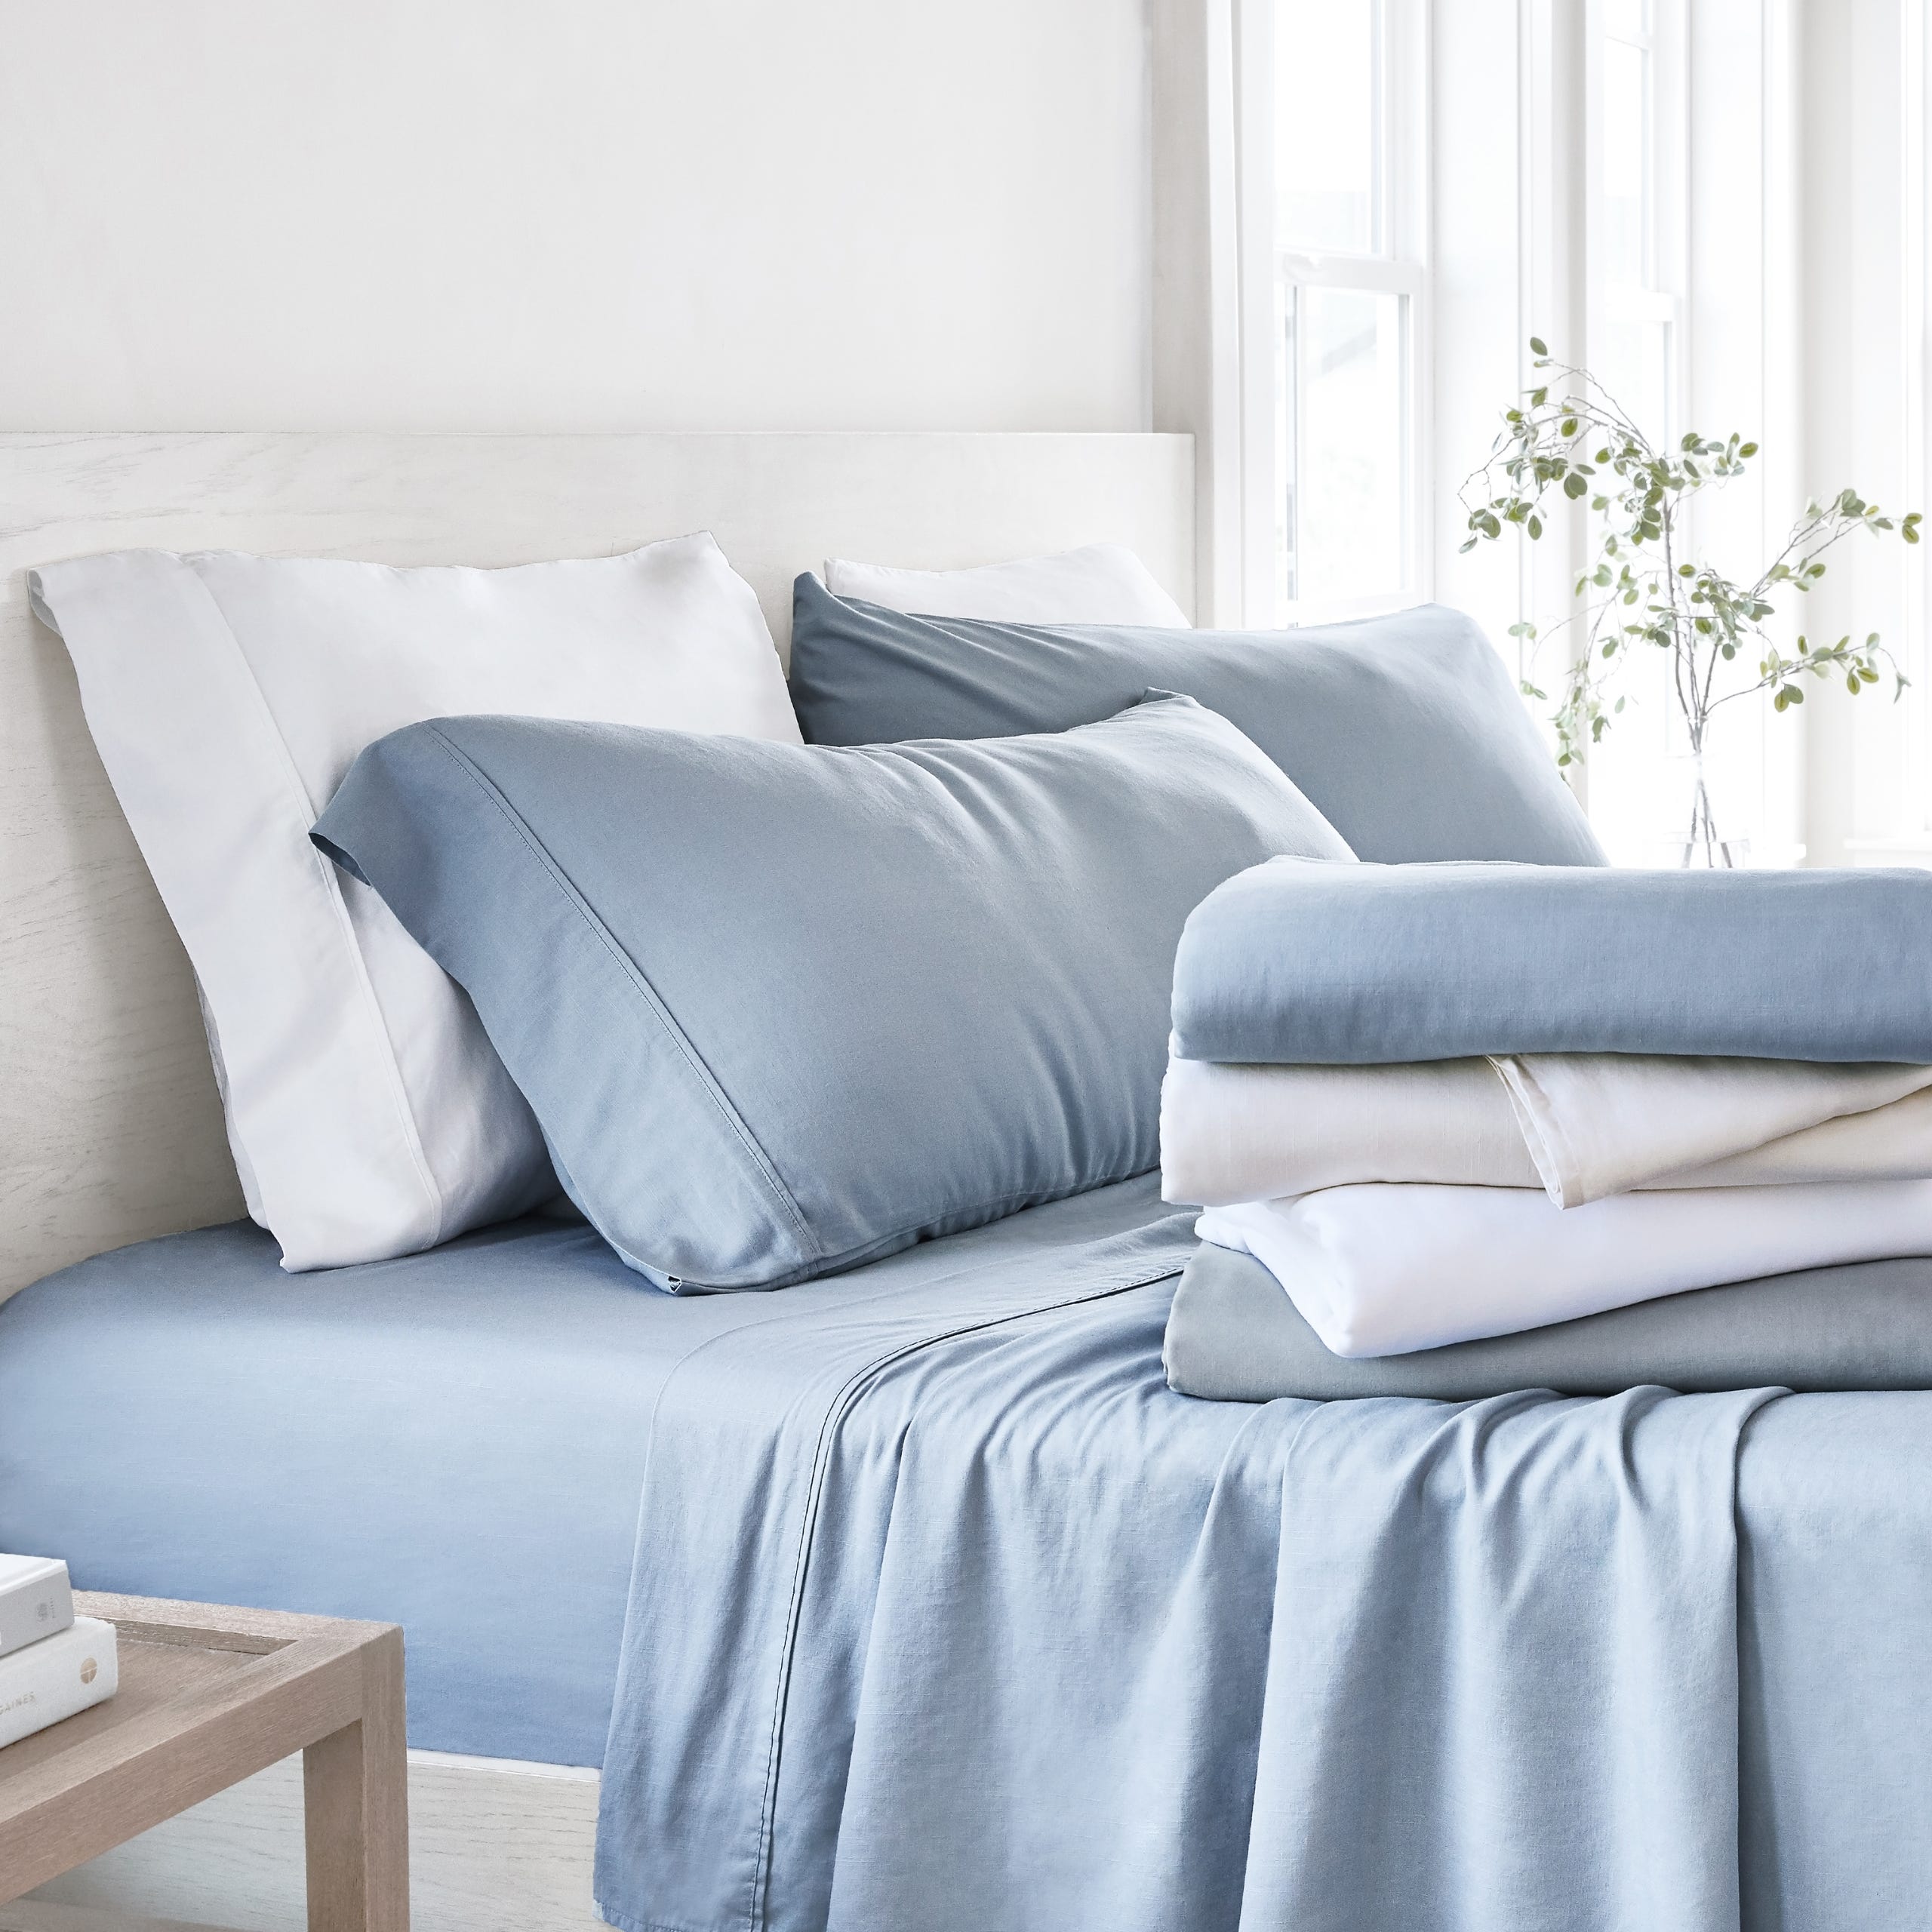 A neatly made bed with blue and white bedding, including pillows, sheets, and duvet covers.